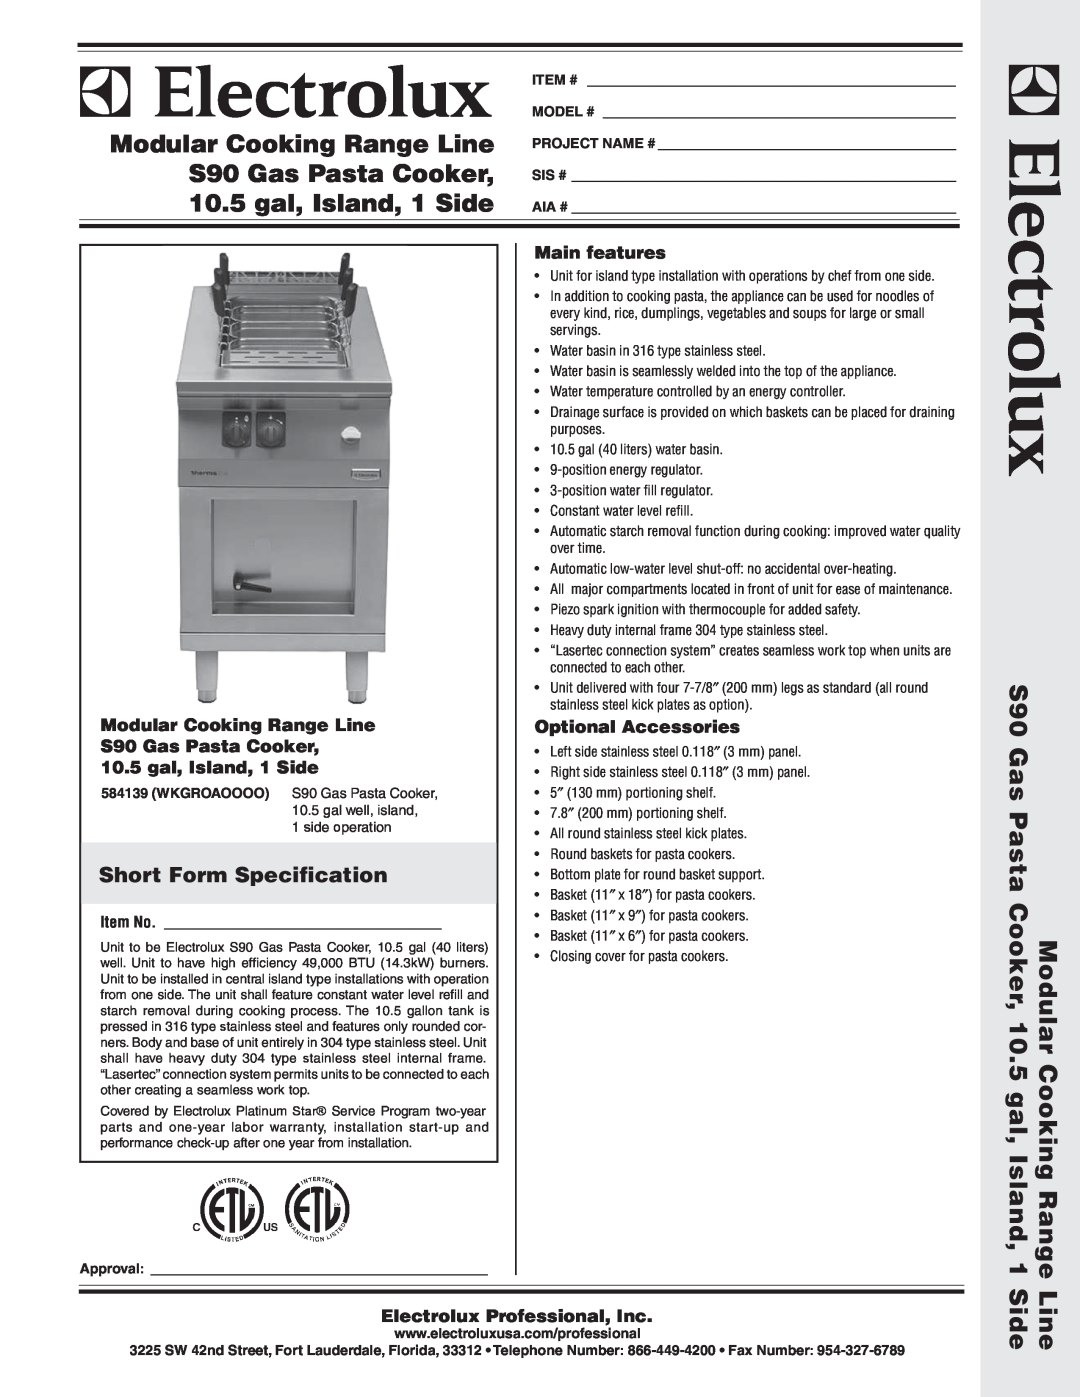 Electrolux 584139 warranty Short Form Specification, Main features, Optional Accessories, Electrolux Professional, Inc 